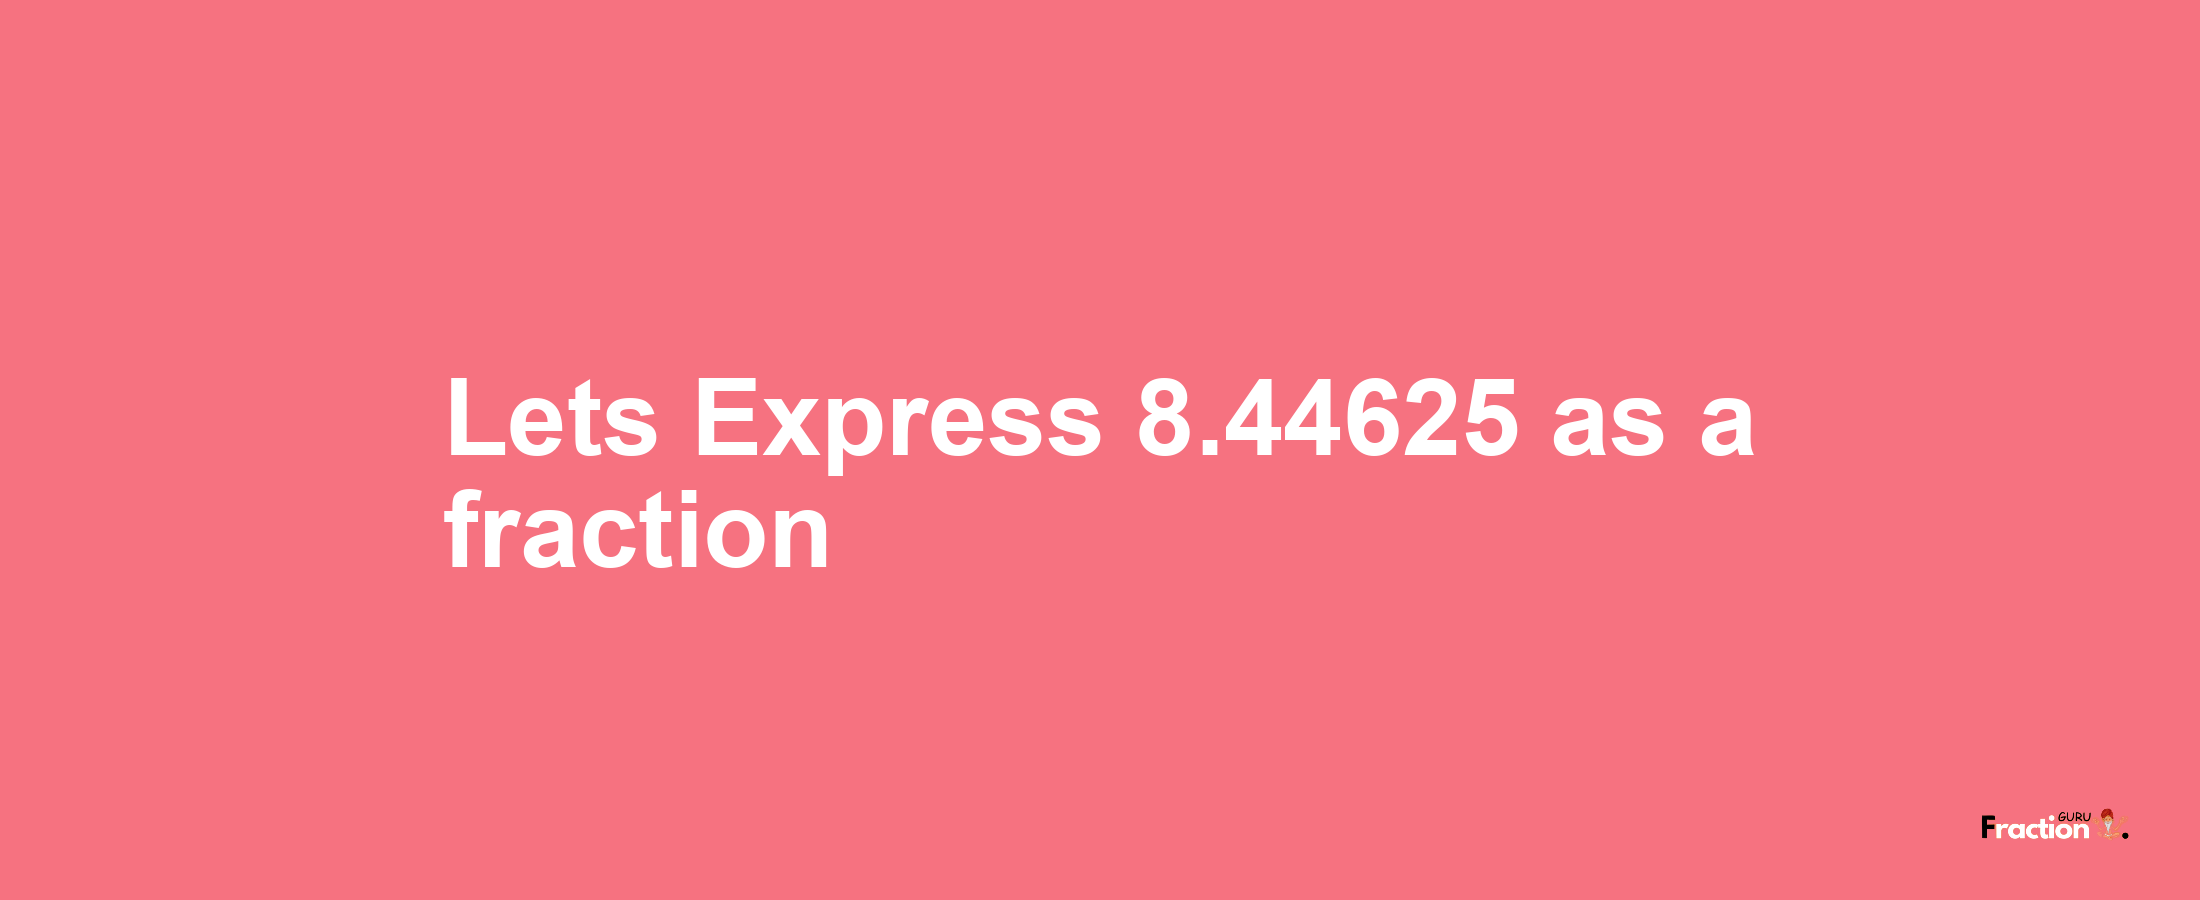 Lets Express 8.44625 as afraction